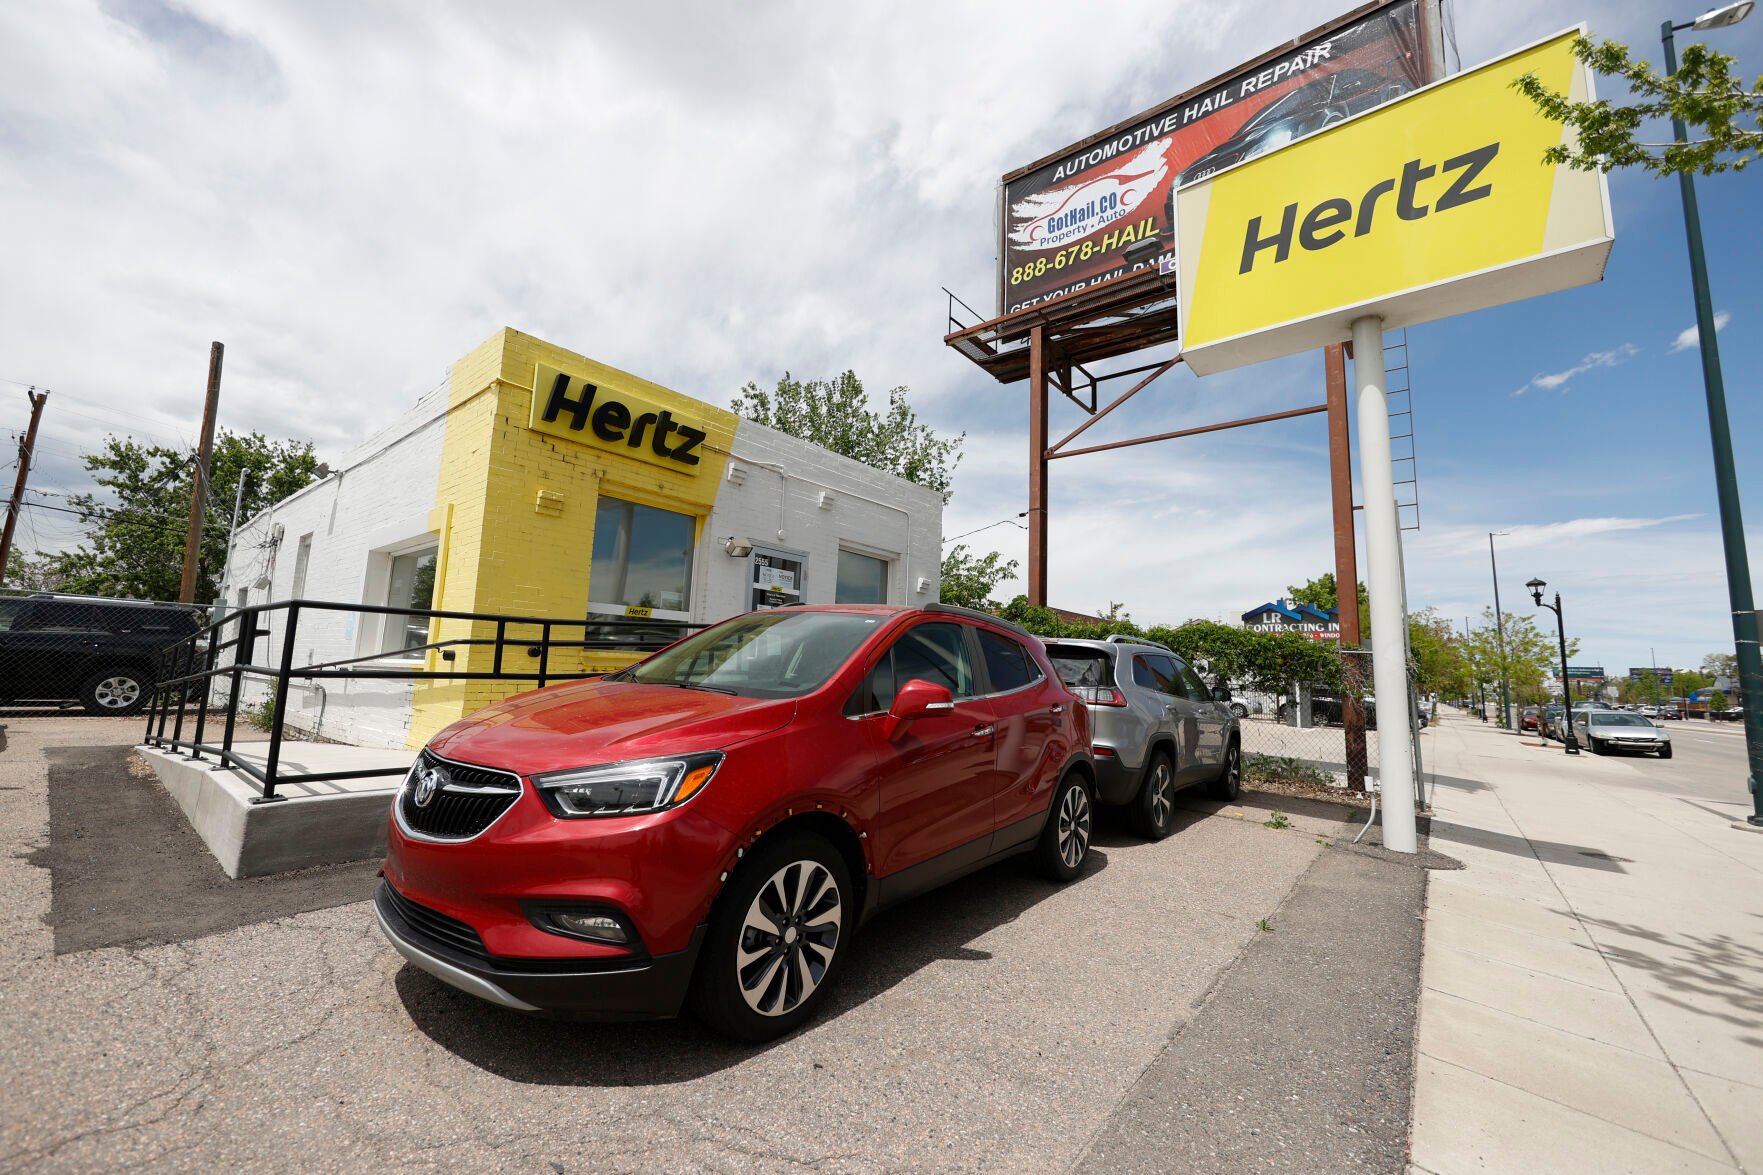 <p>This May 23, 2020, photo shows rental vehicles parked outside a closed Hertz car rental office in south Denver. Hertz says it will pay approximately $168 million by the end of the year to settle the majority of the lawsuits brought against the rental car company by some of its customers who were wrongly accused of stealing cars they had rented. In April Hertz CEO Stephen Scherr, who took over the role in February, said that he was working to fix a glitch in the company’s systems that led to the incidents. (AP Photo/David Zalubowski, file)</p>   PHOTO CREDIT: David Zalubowski 